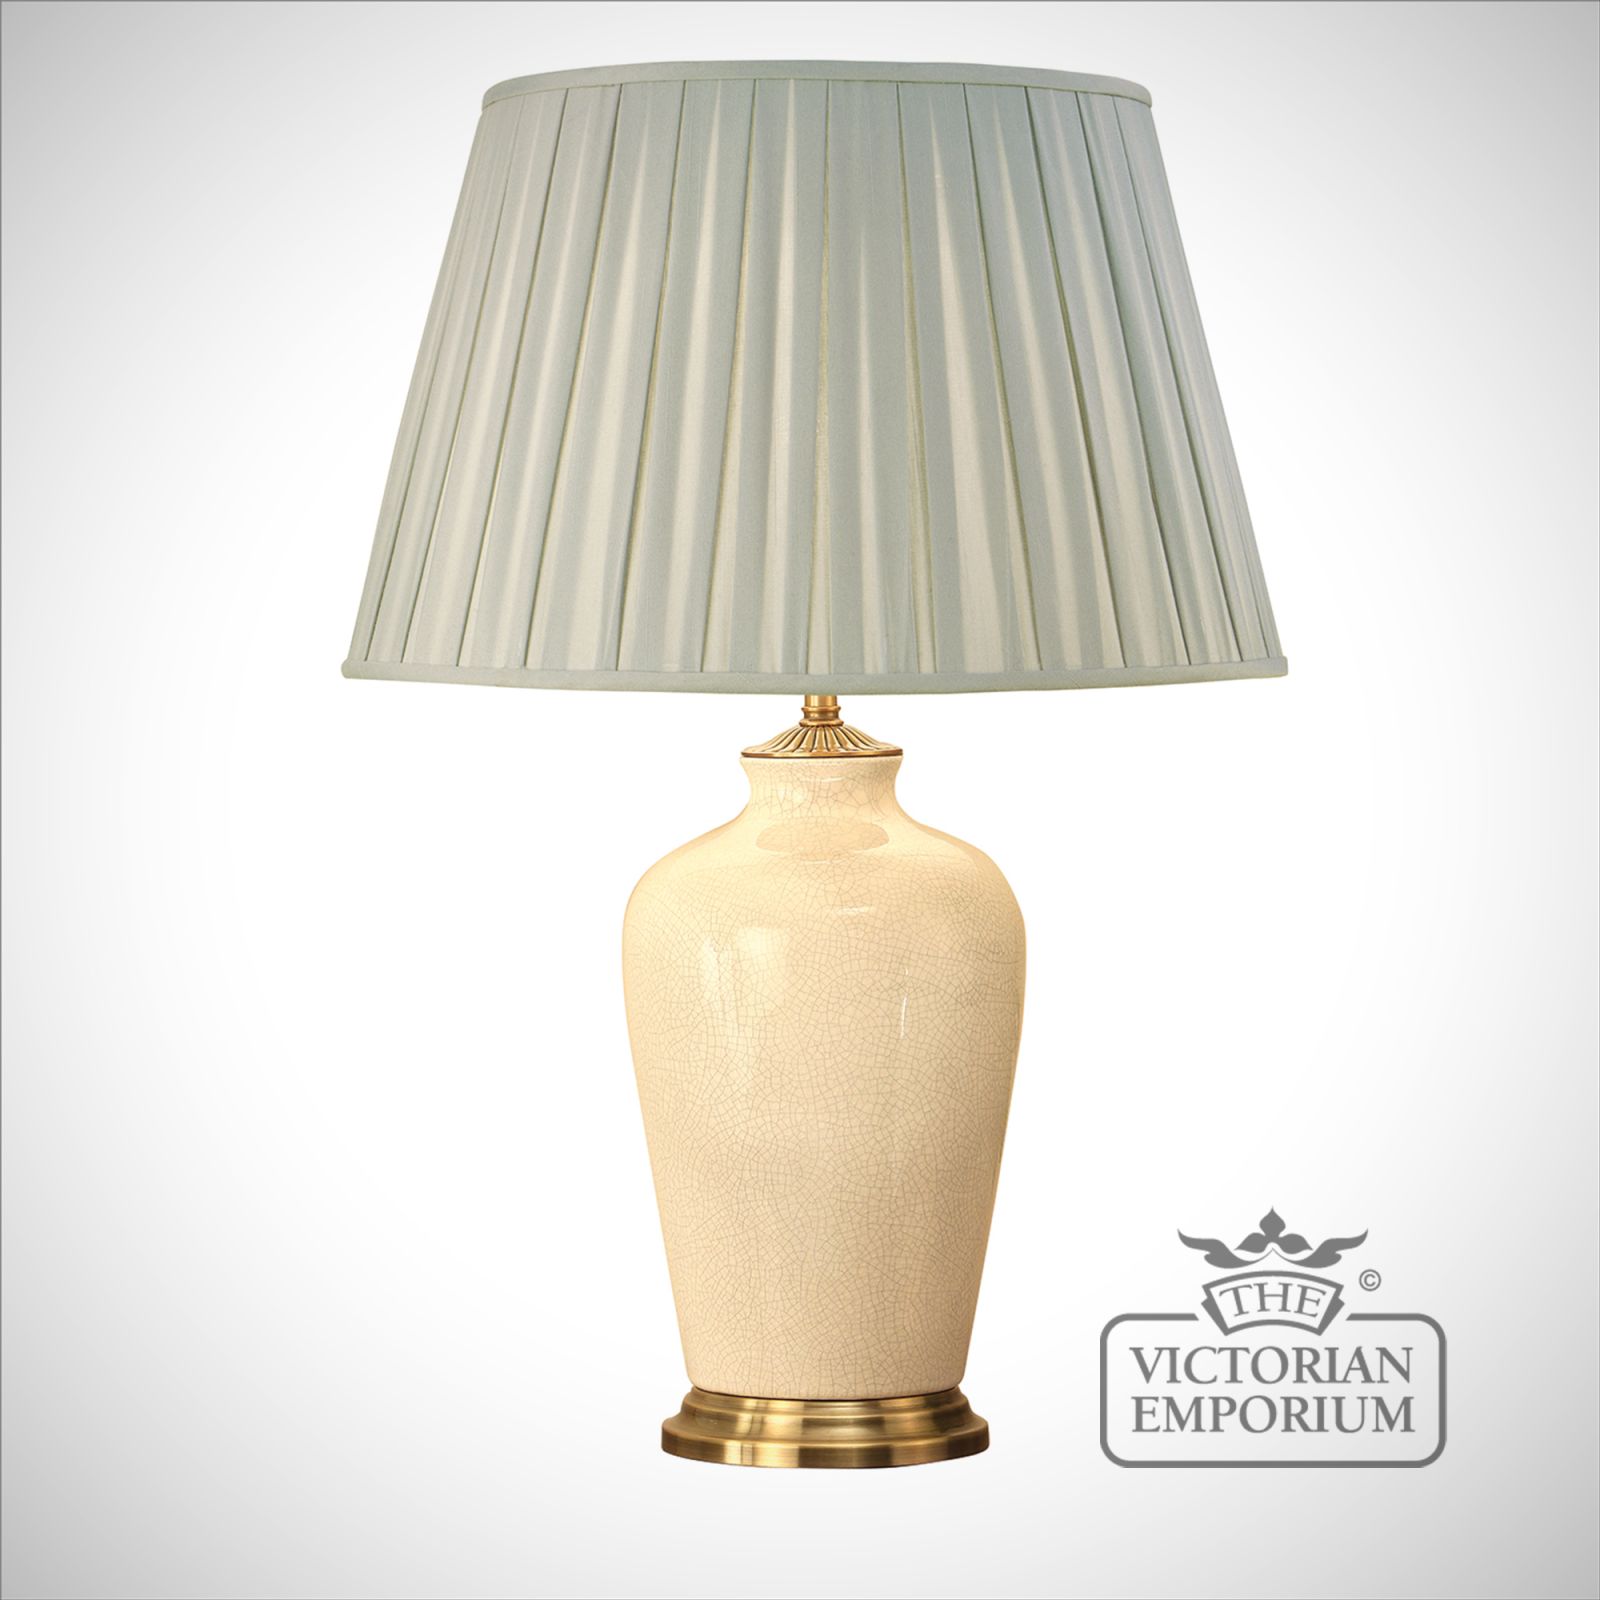 Ryhall ivory table lamp - small or large